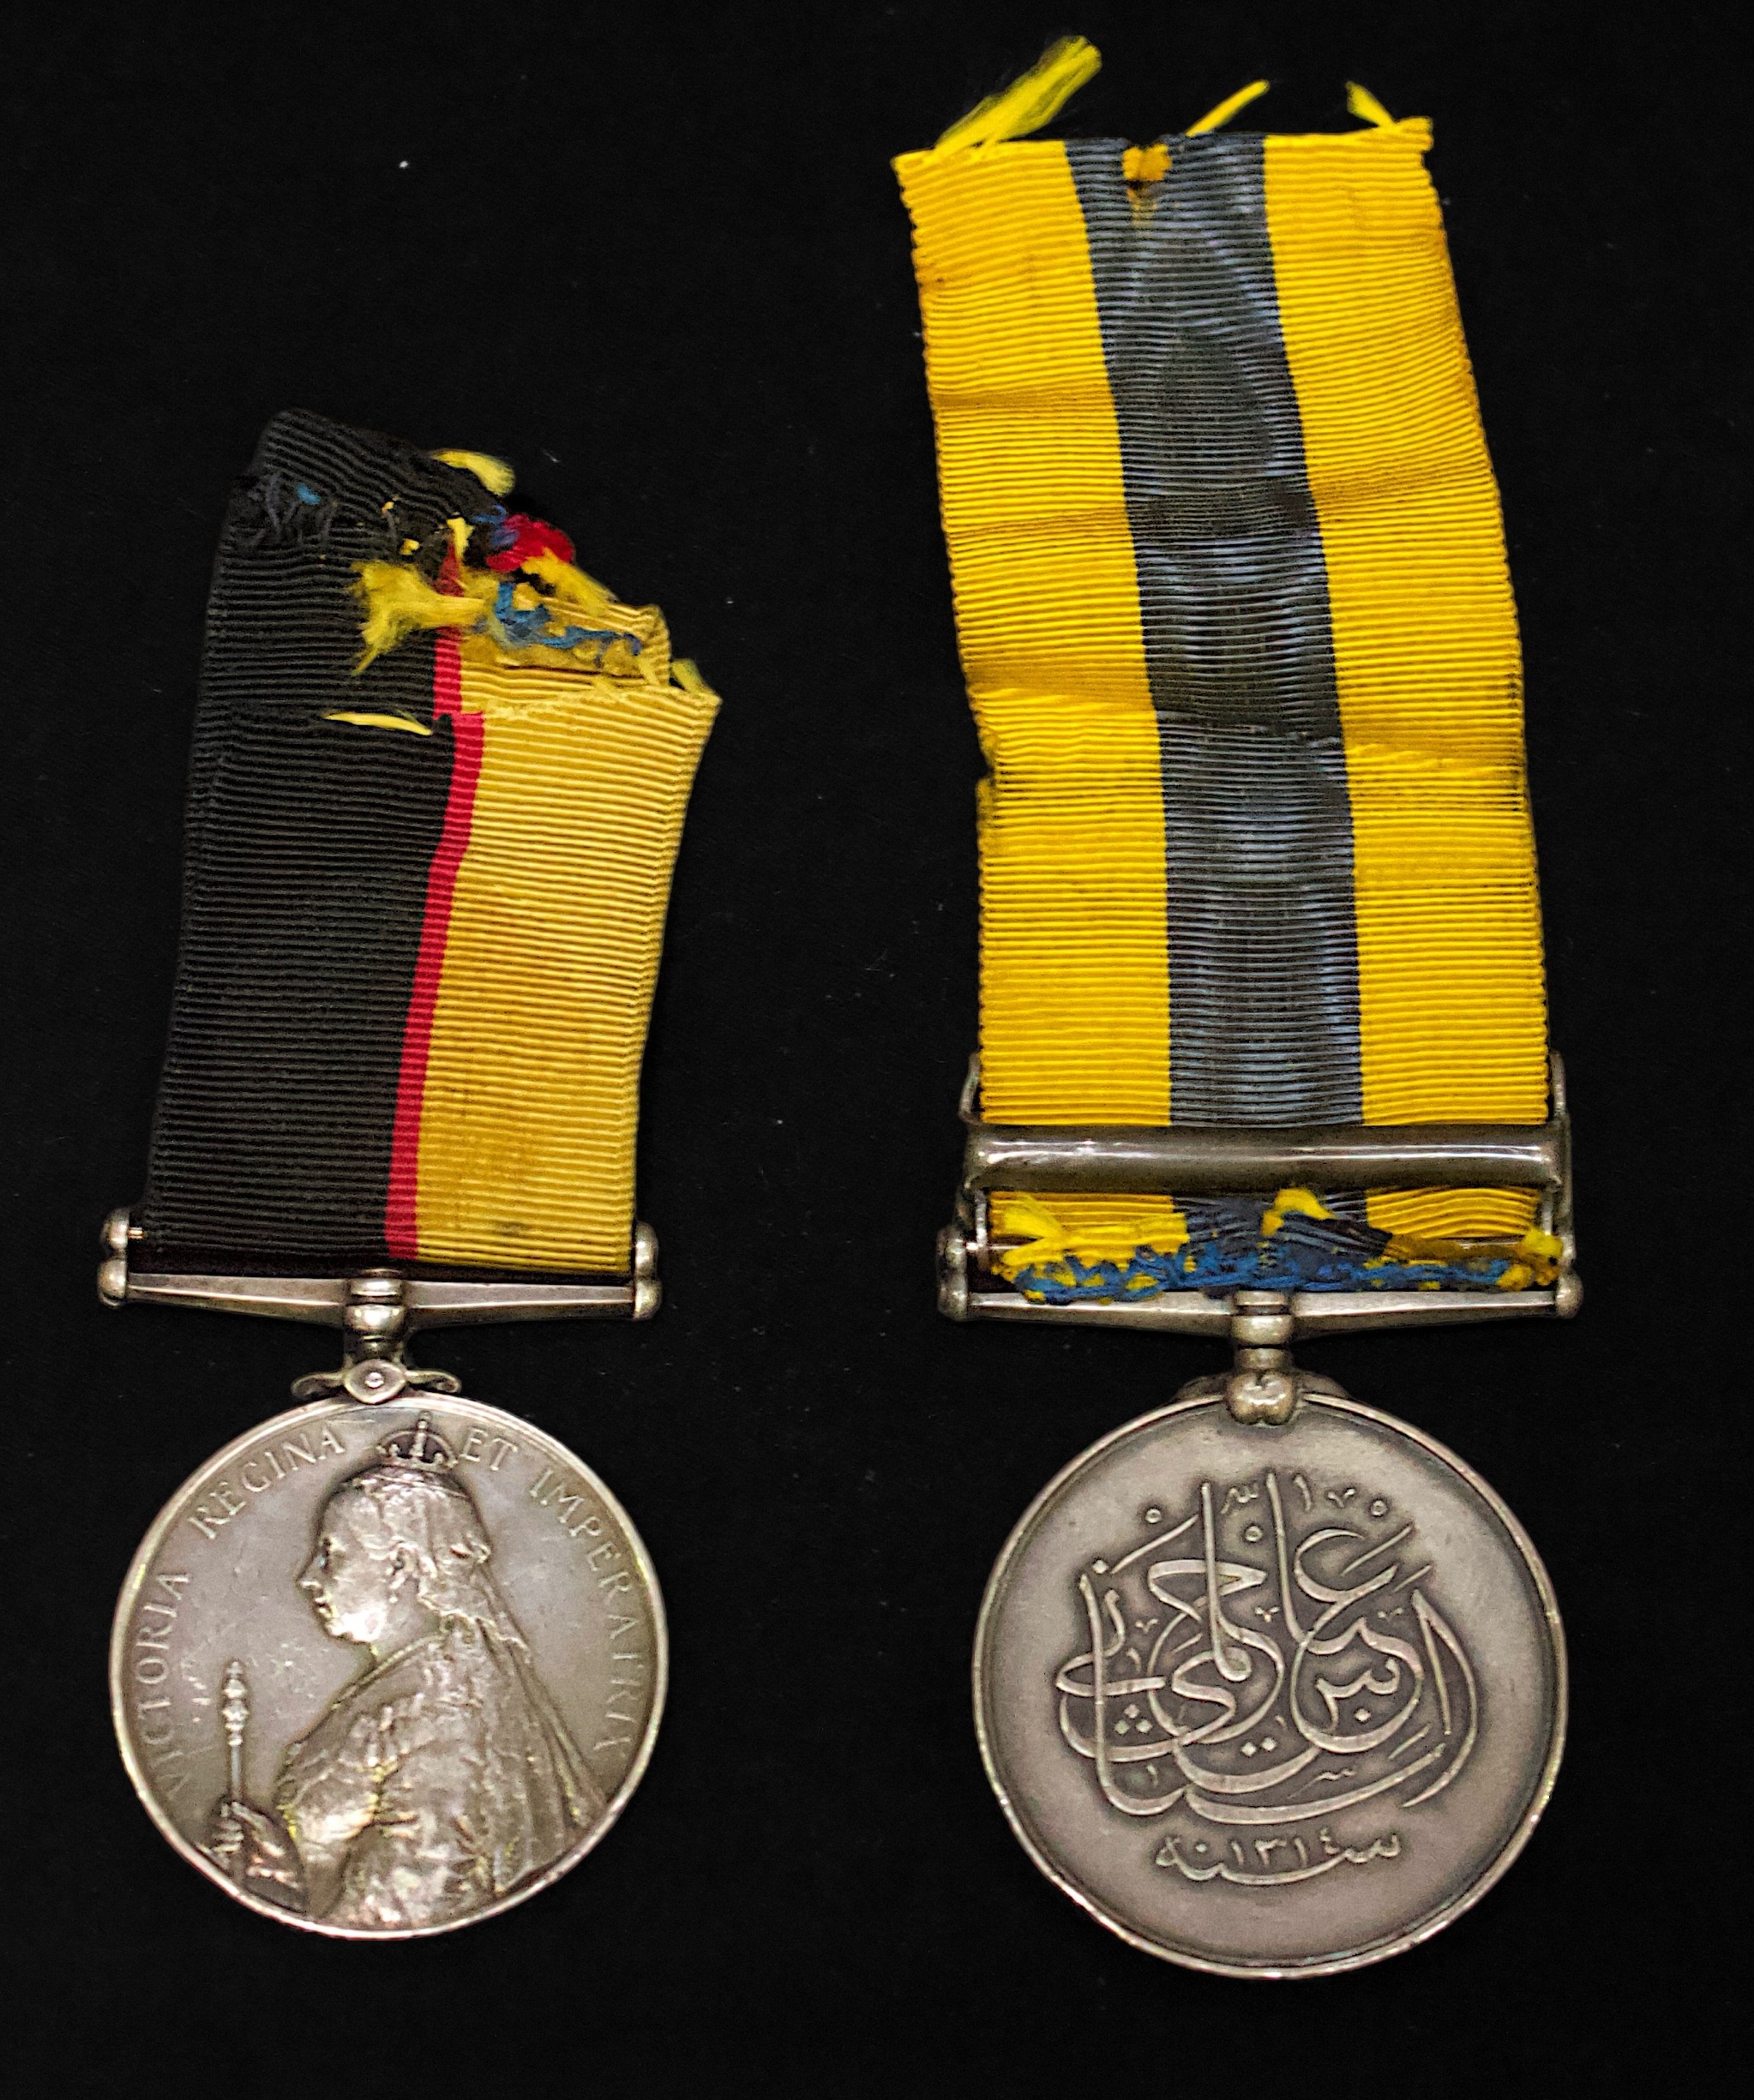 A Queen's Sudan 'Wound' Pair of Queen's Sudan Medal 1899 and Khedive's Sudan Medal with Khartoum